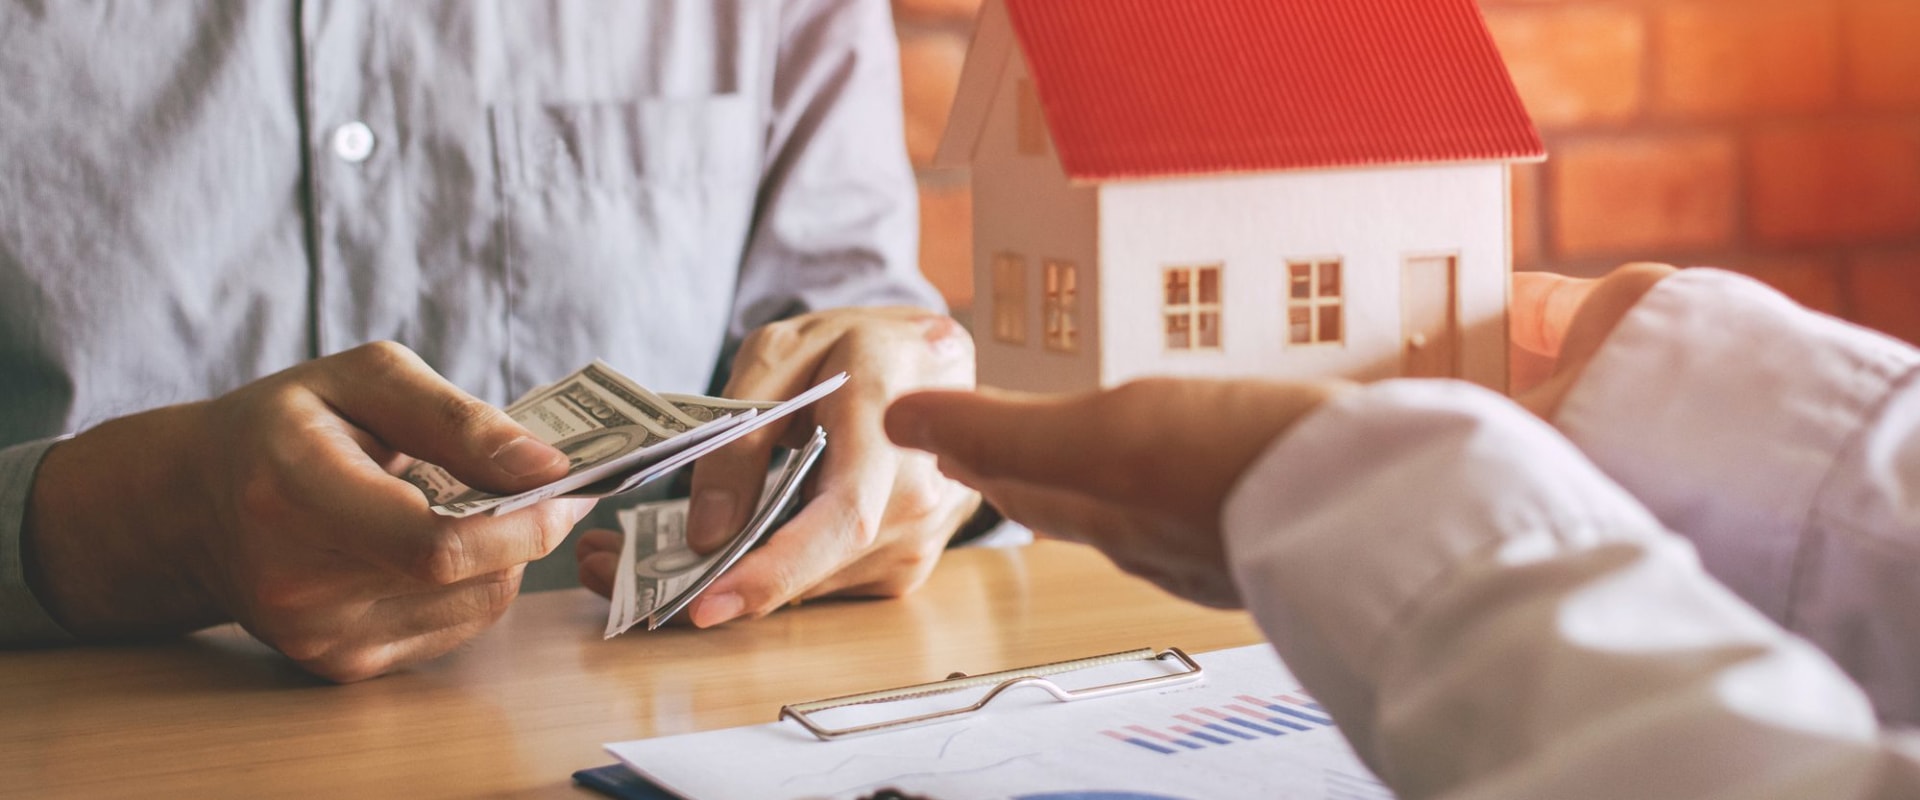 How to Avoid Being Scammed When Buying a House